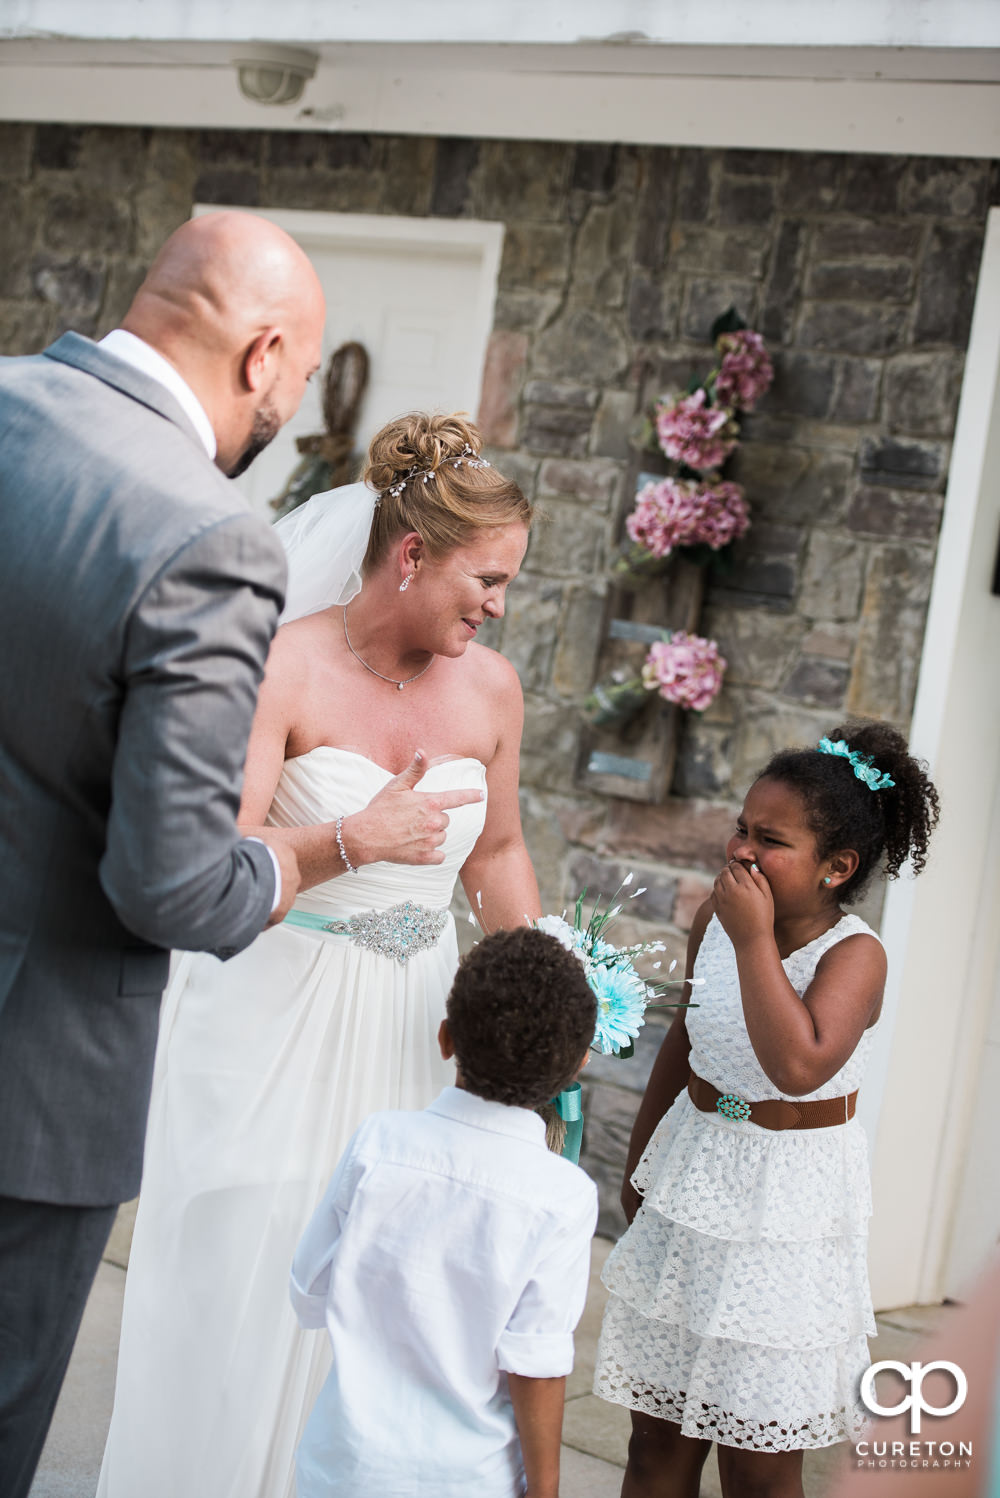 Bride and groom celebrating with their children after their wedding.